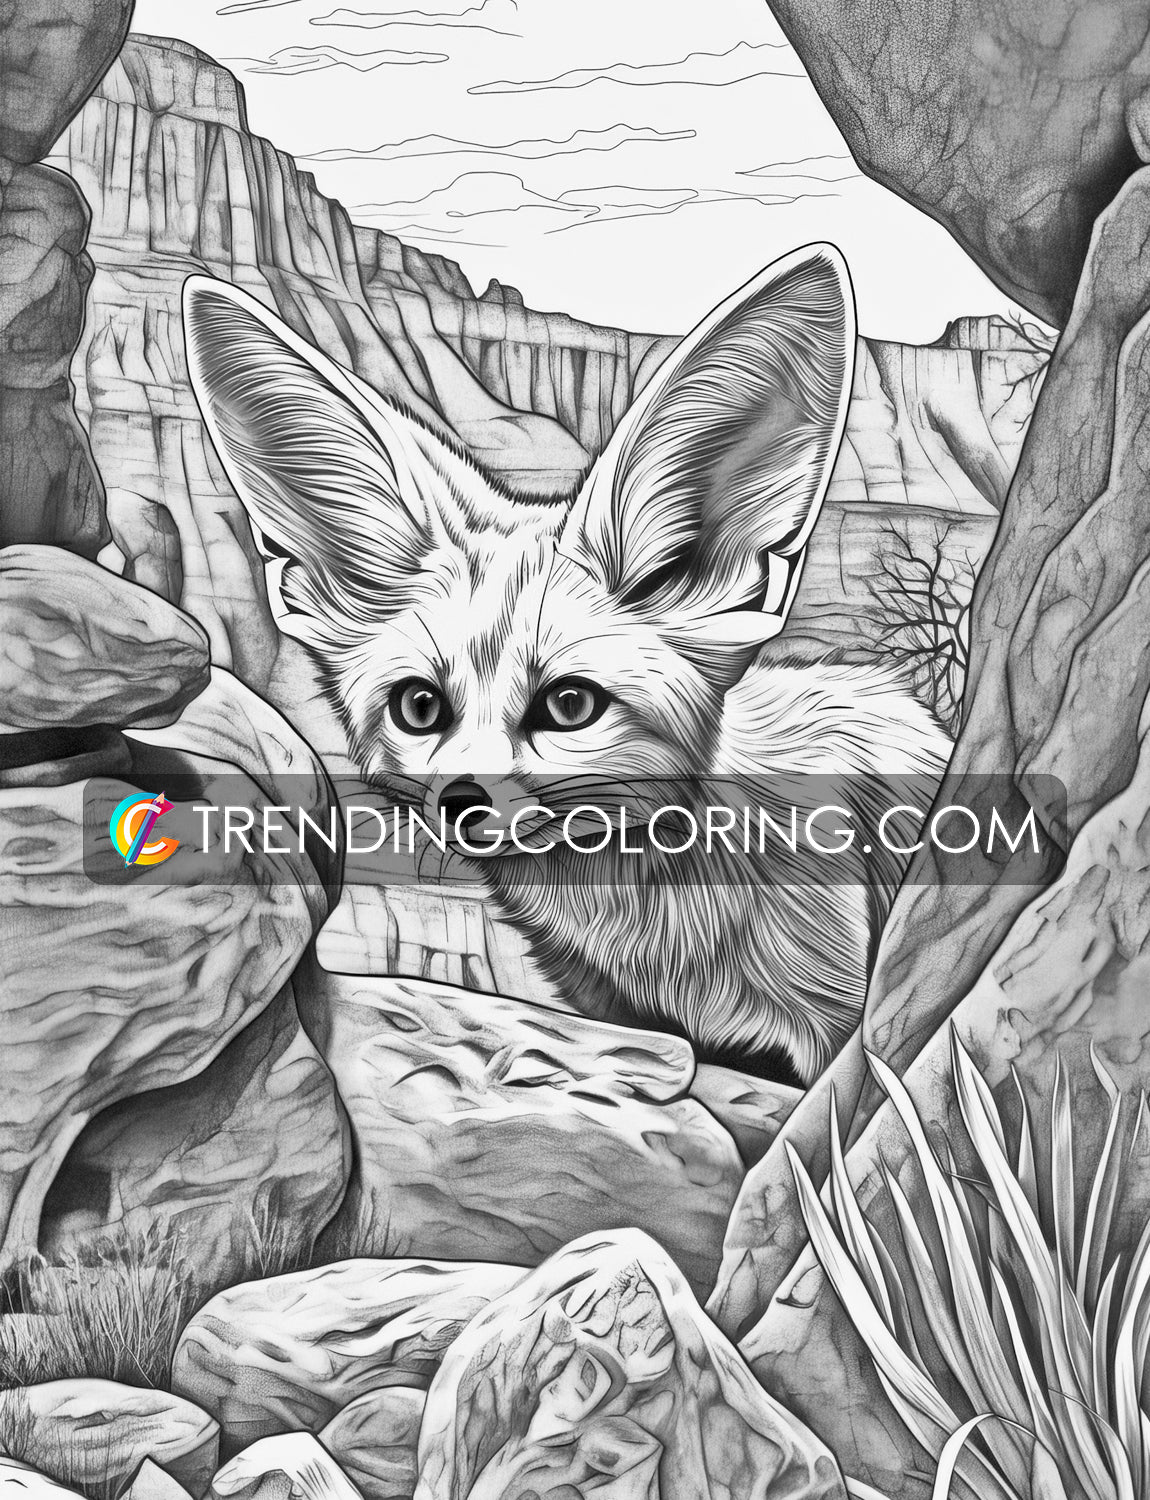 25 Wild Animal Grayscale Coloring Pages - Instant Download - Printable PDF